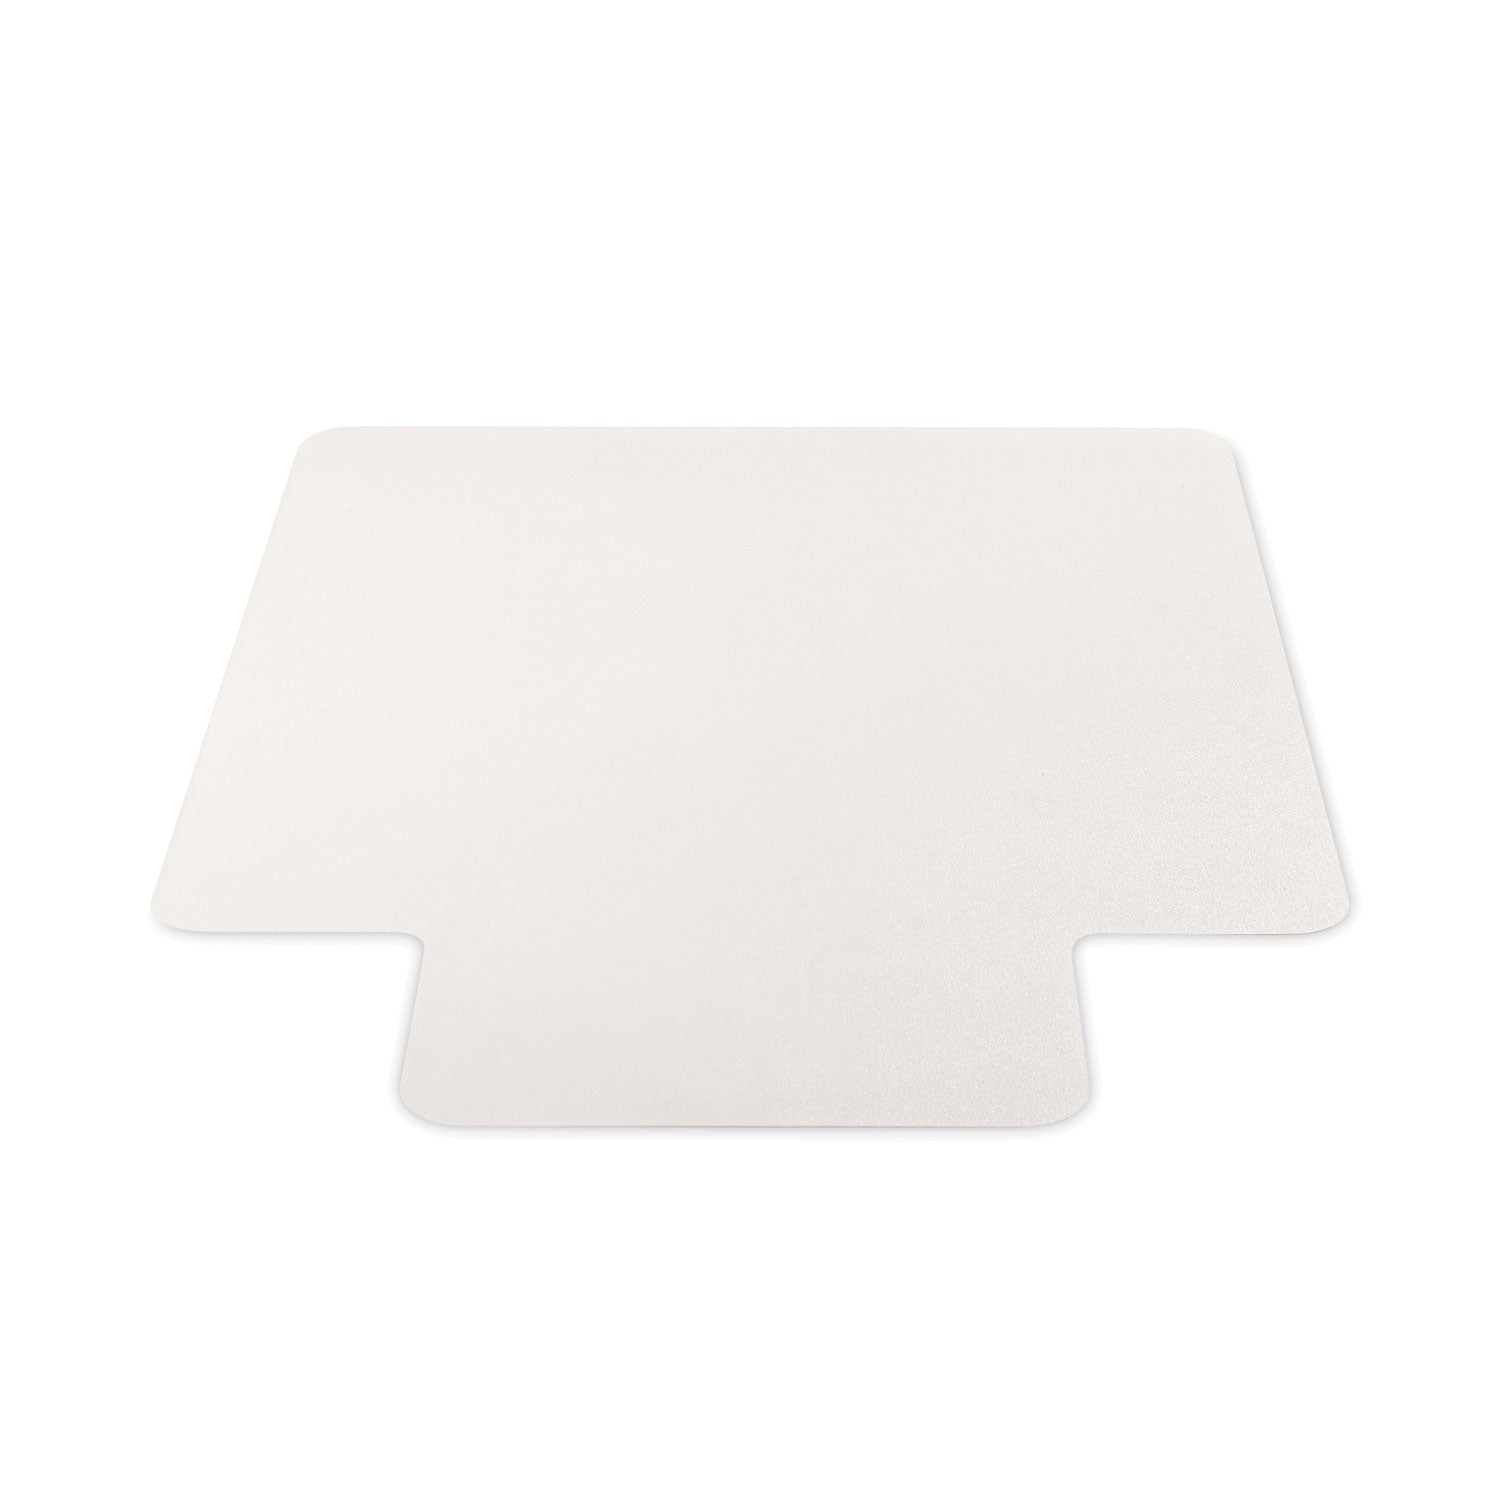 economat-all-day-use-chair-mat-for-hard-floors-flat-packed-46-x-60-lipped-clear_defcm2e432f - 8